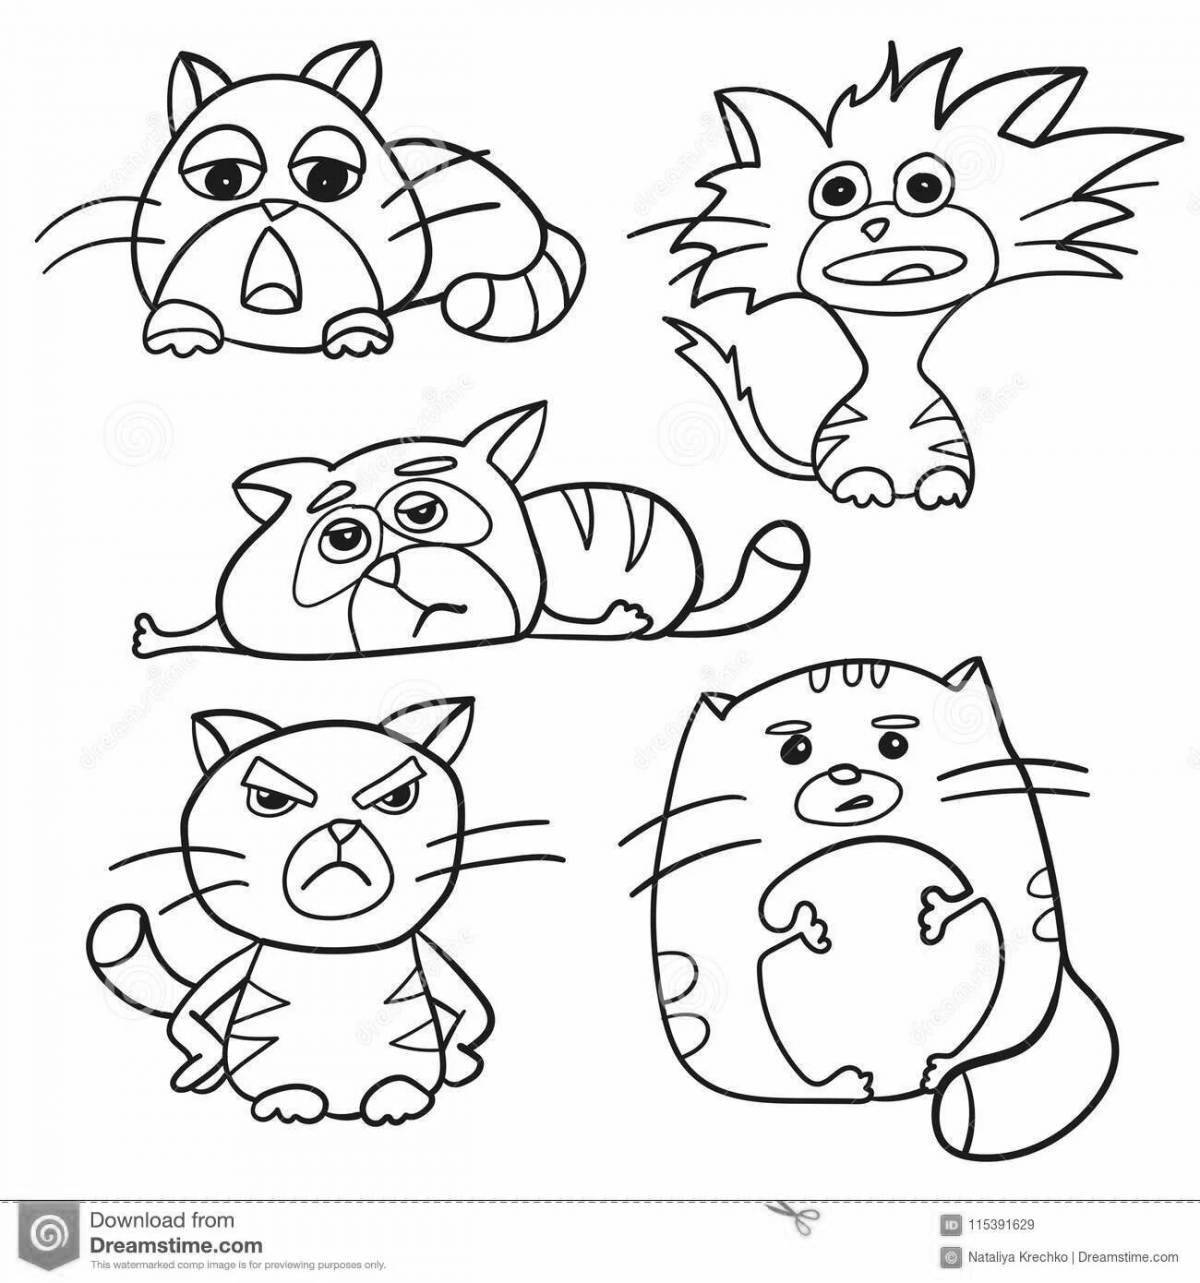 Cute little cats coloring page